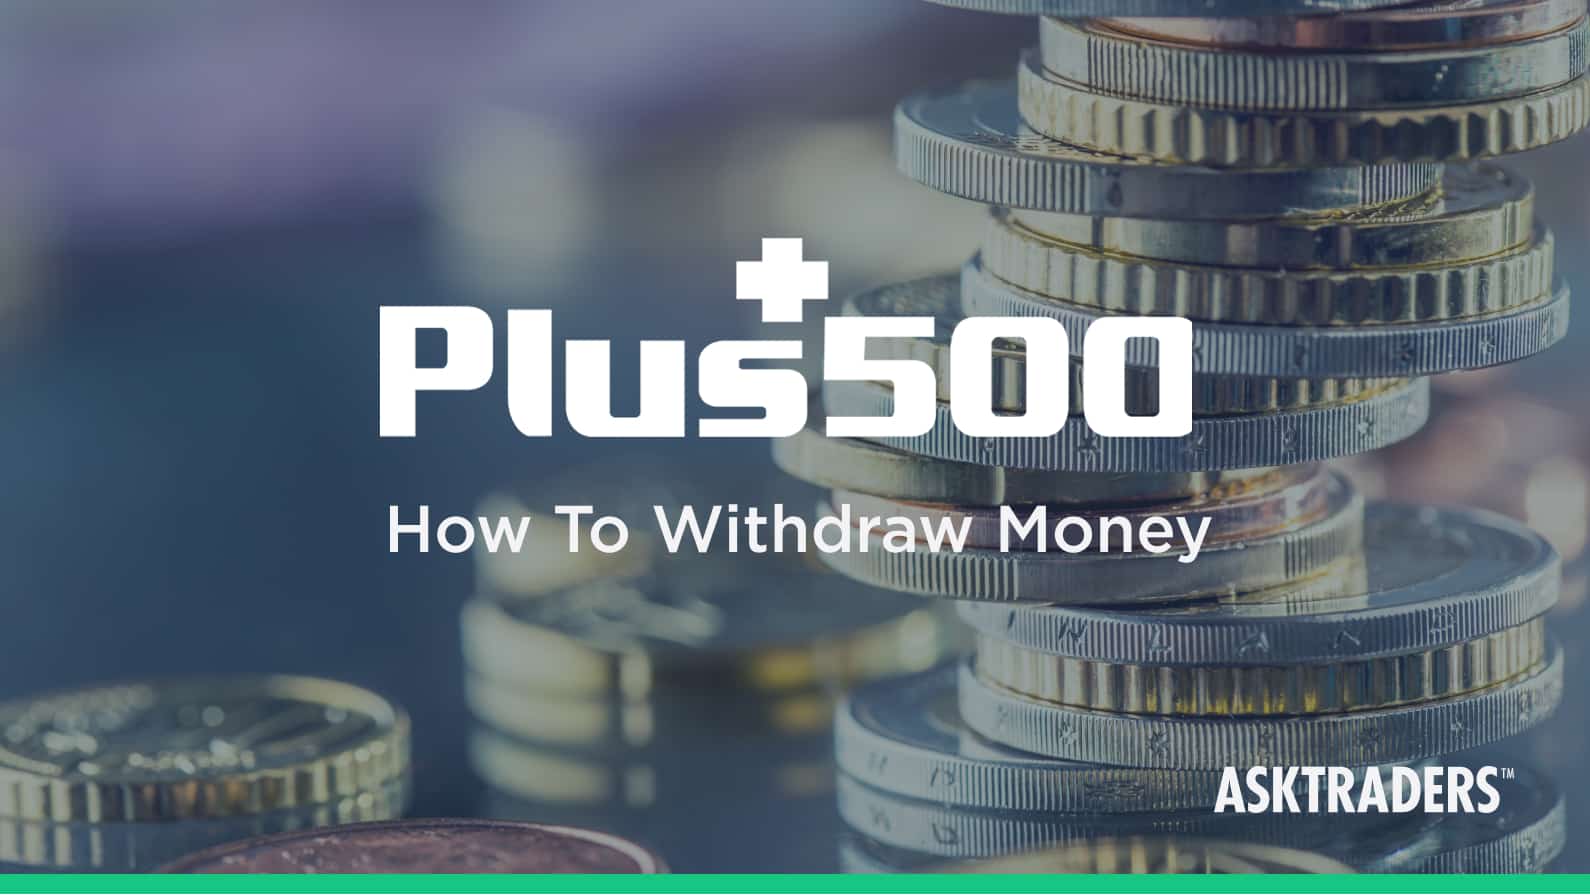 Plus500 Withdrawal Guide – How To Withdraw Money